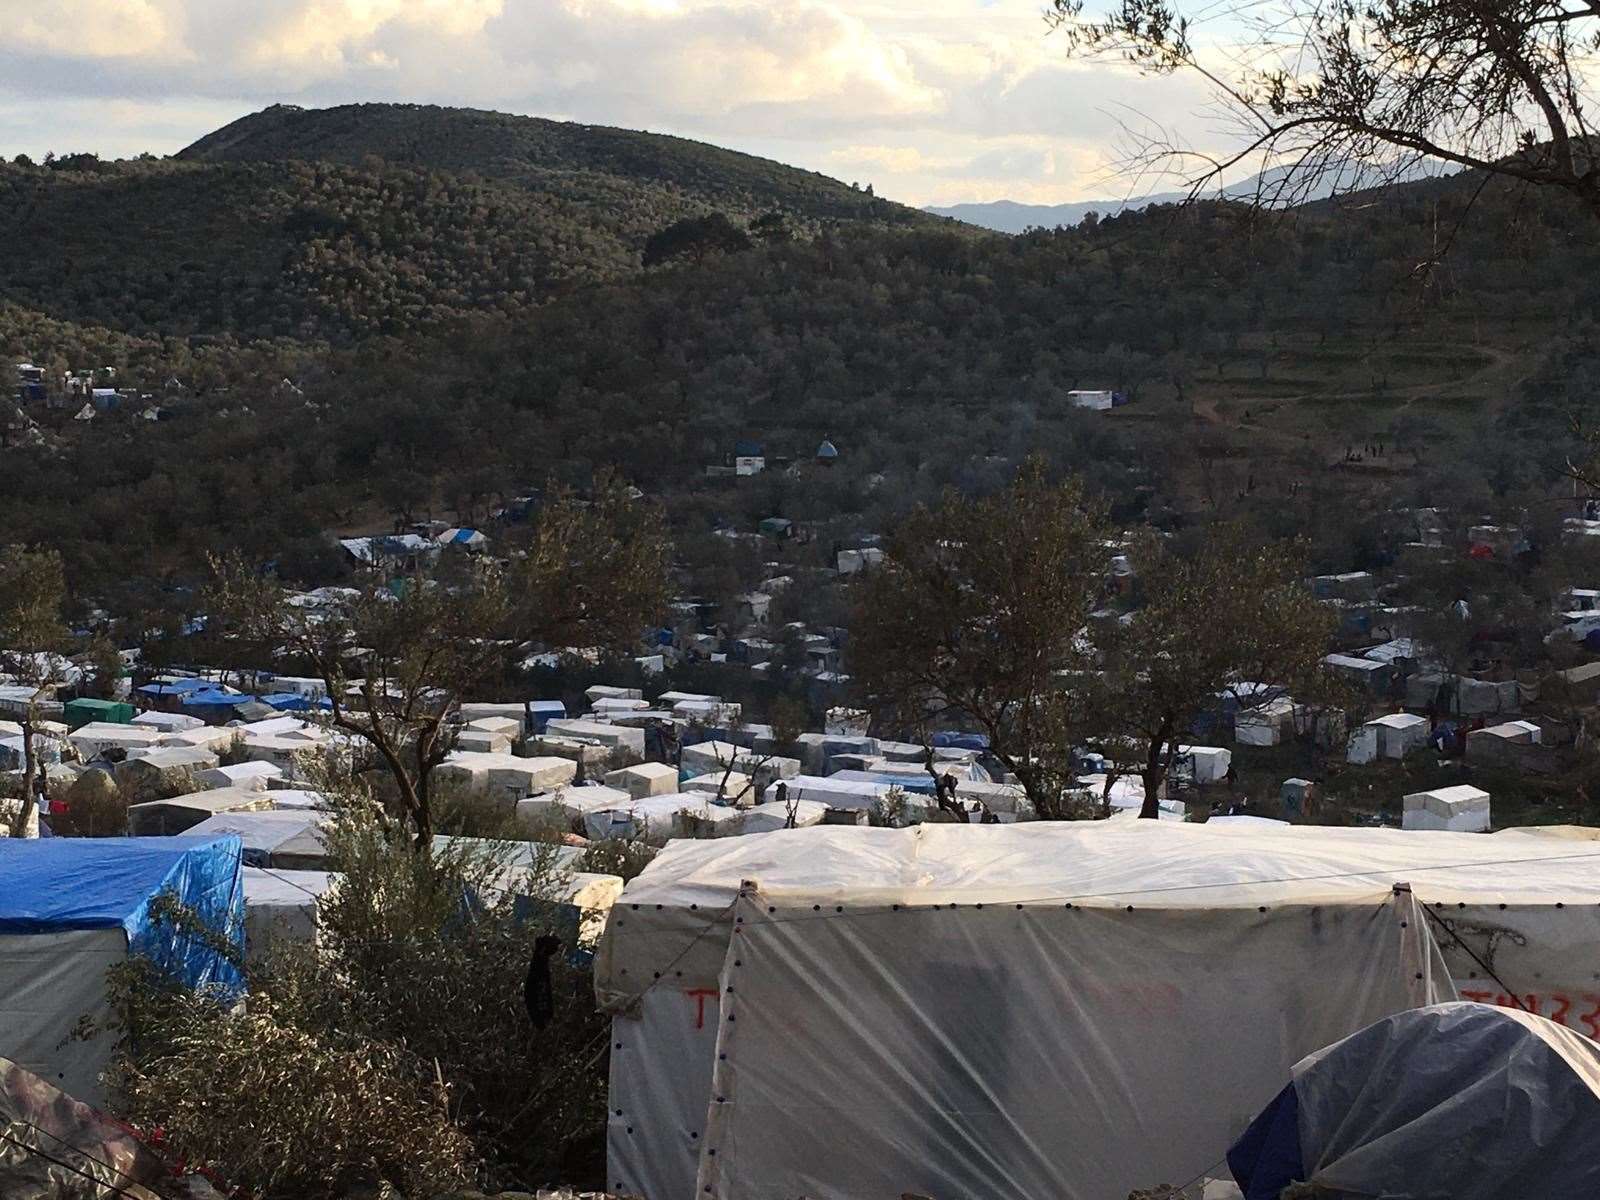 View of the Moria Camp in Lesbos.